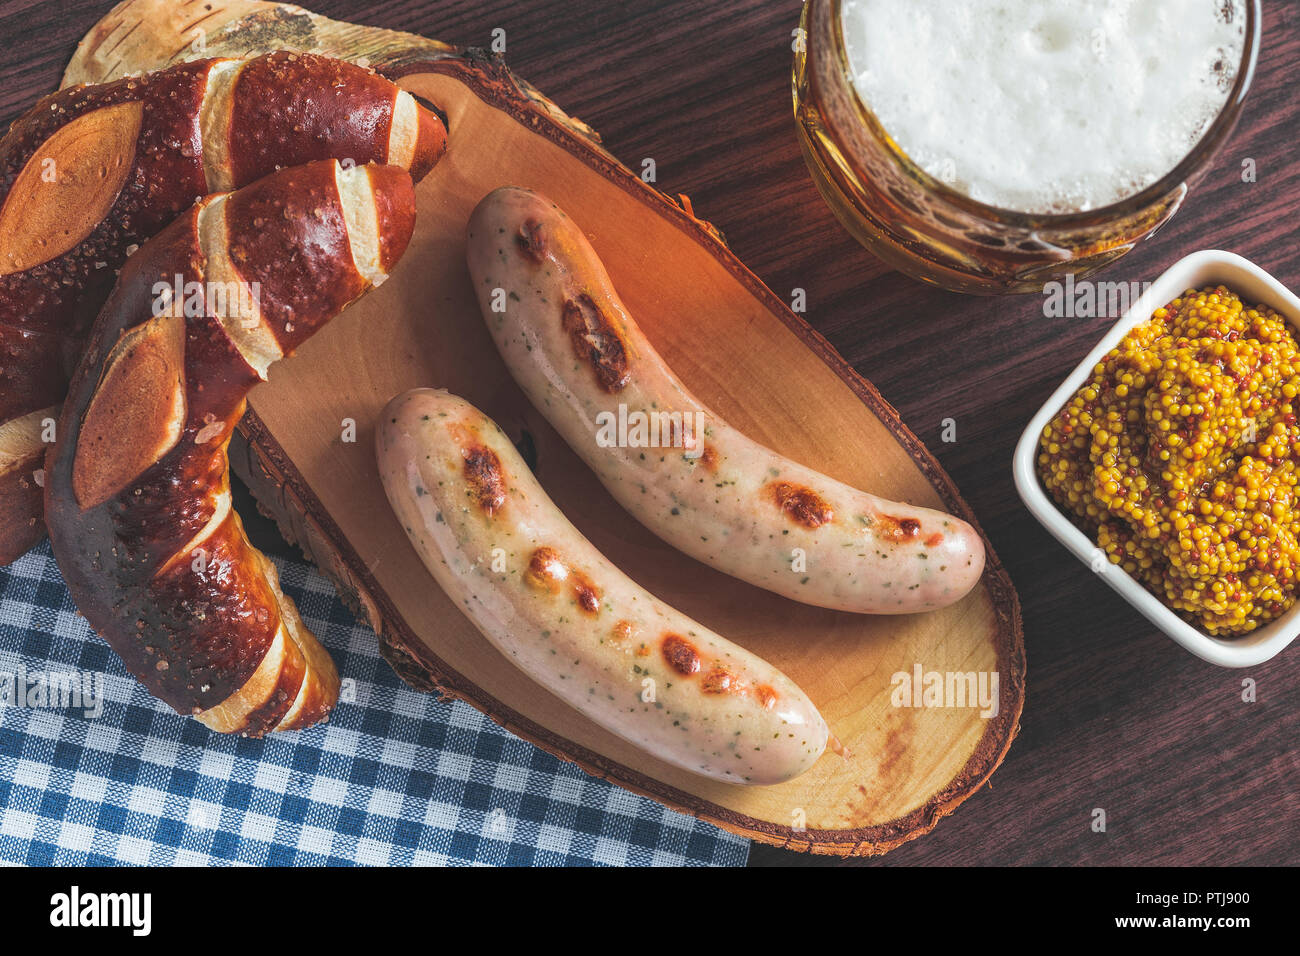 The bavarian weisswurst, pretzel and beer. Stock Photo